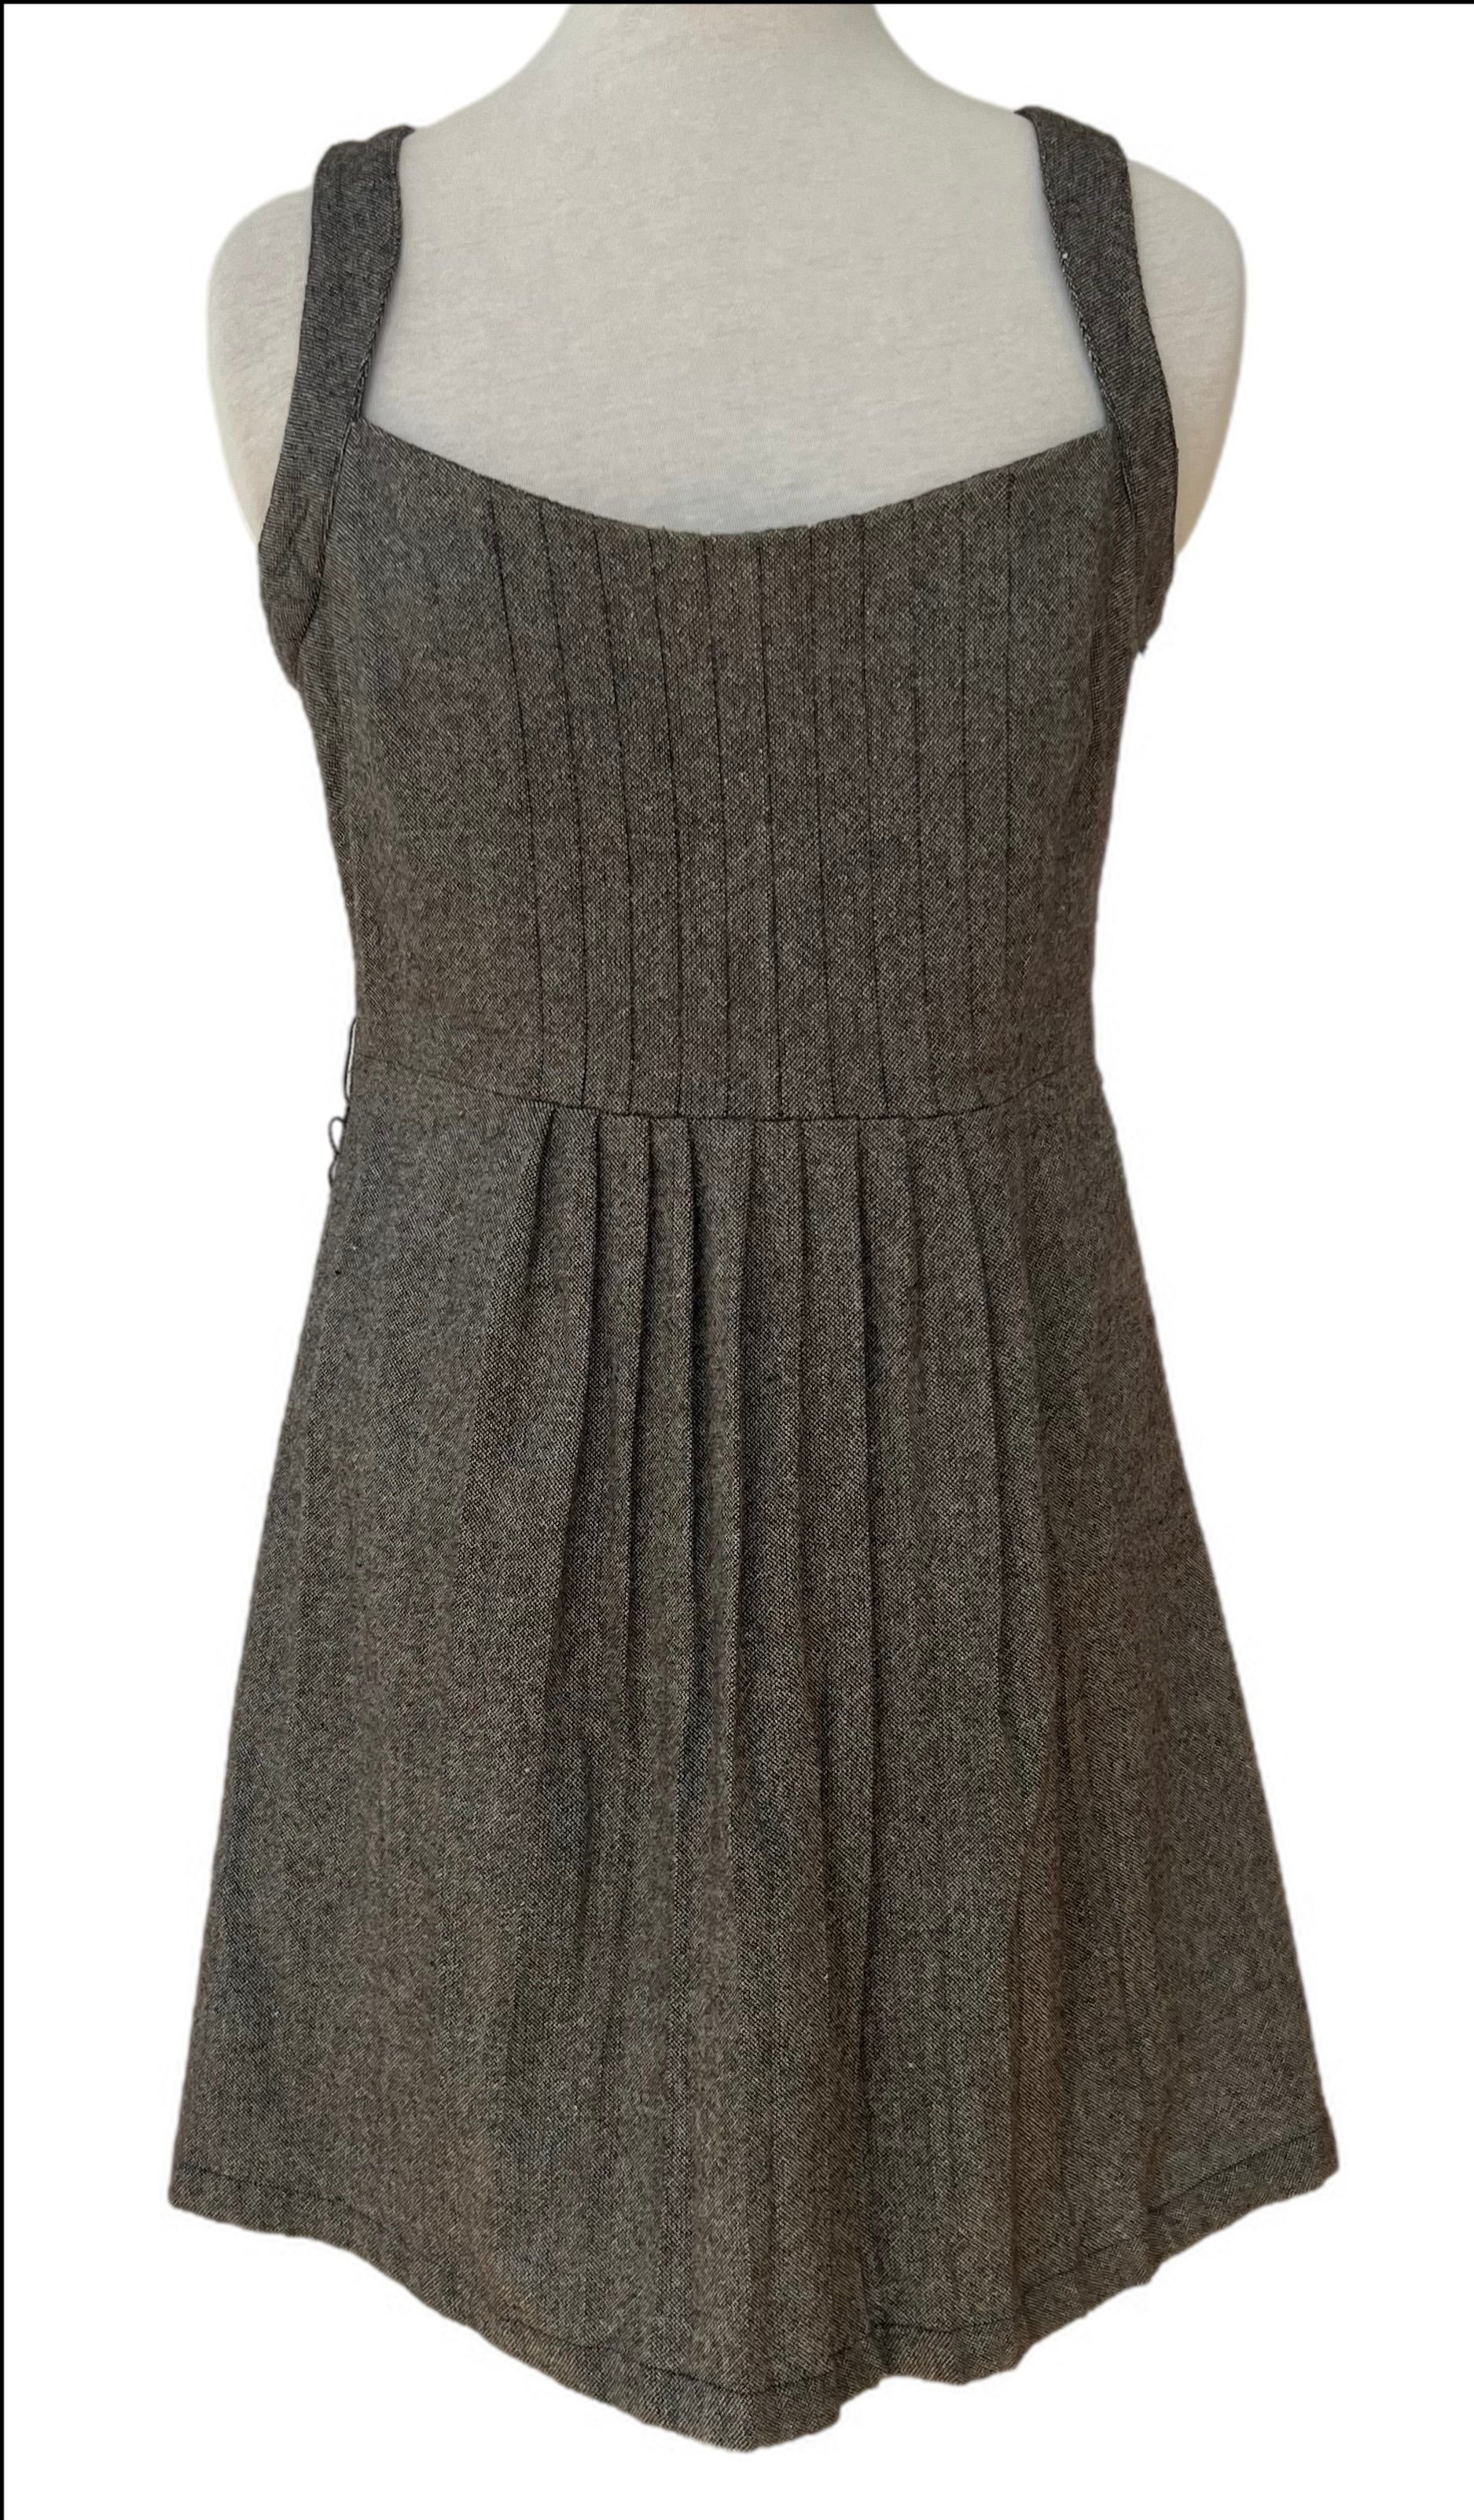 Twill sleeveless dress with pleat front detail